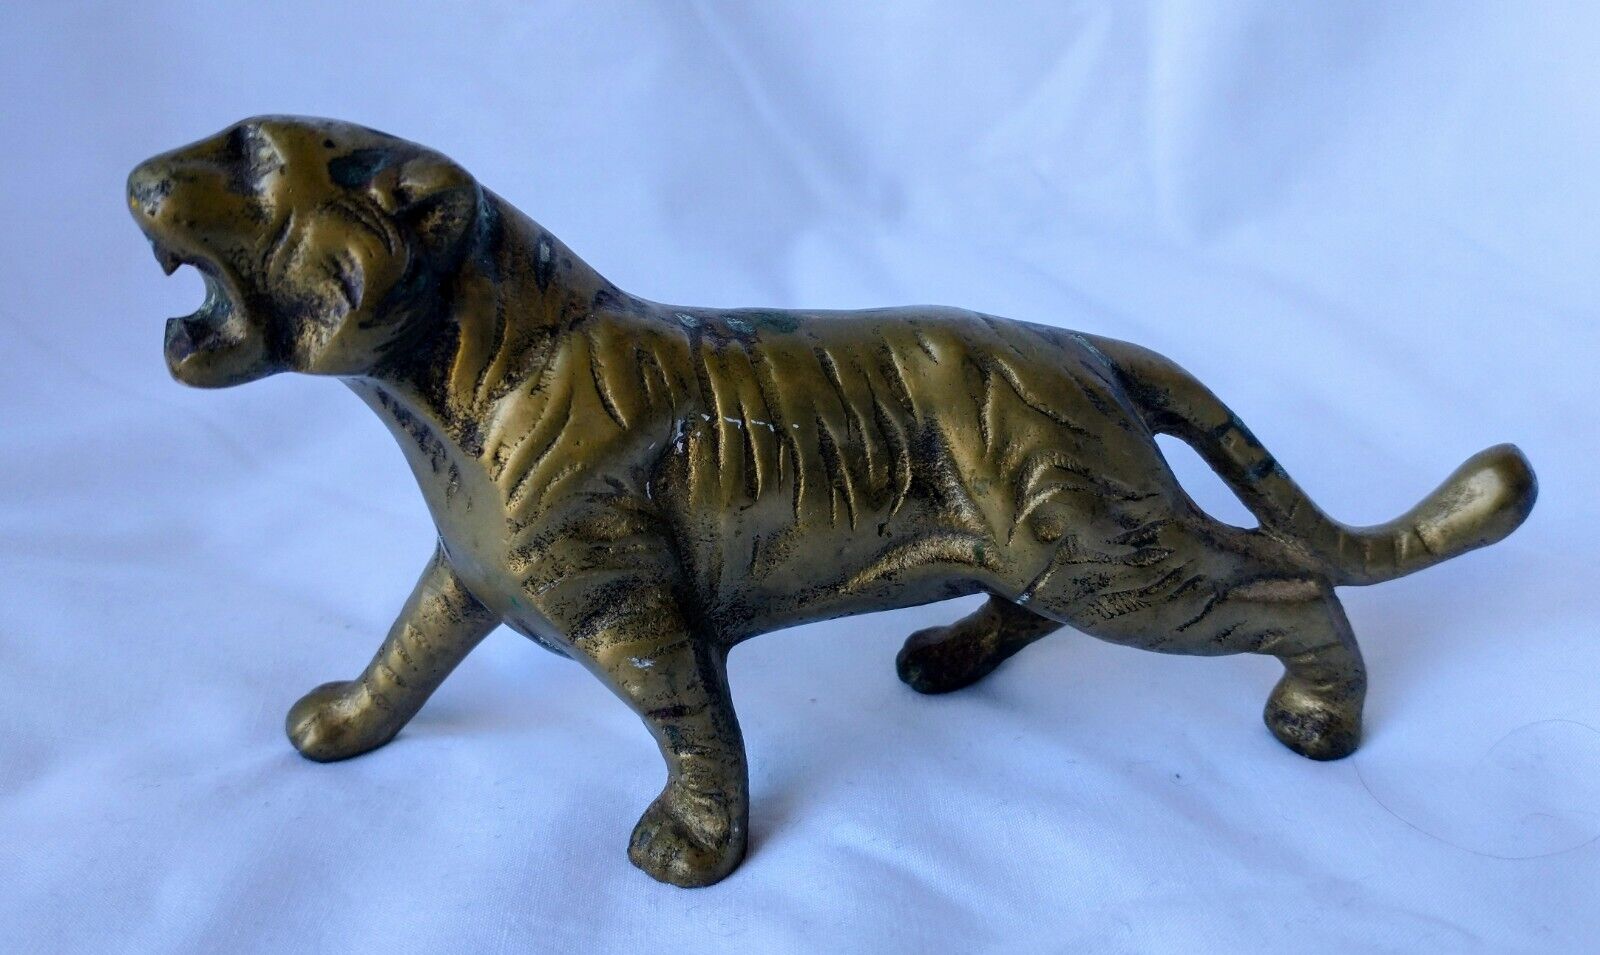 Vintage 1950s Solid Brass Tiger w Patina Figurine, 6.25 by 3.25 inches tall